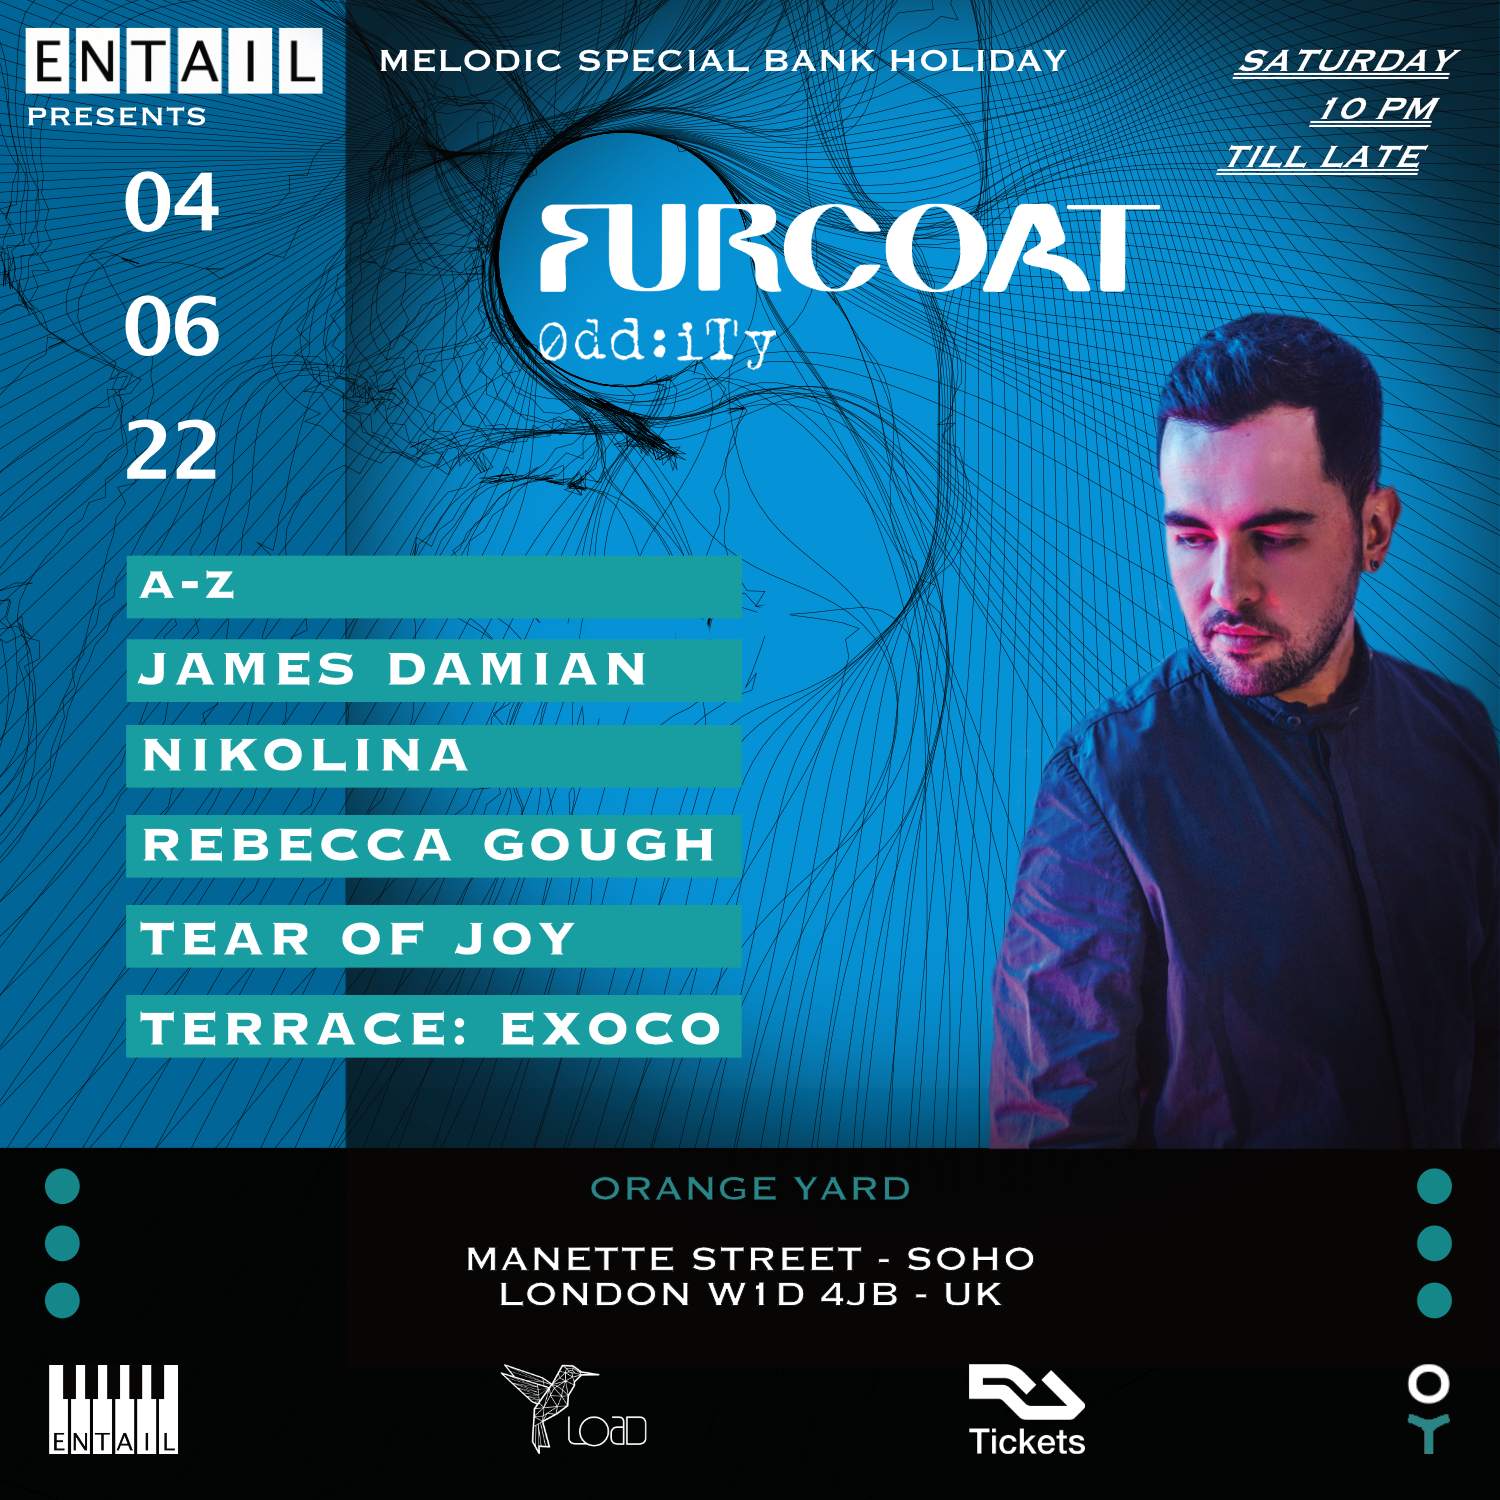 Entail: Melodic Special Bank Holiday with Fur Coat - Página trasera